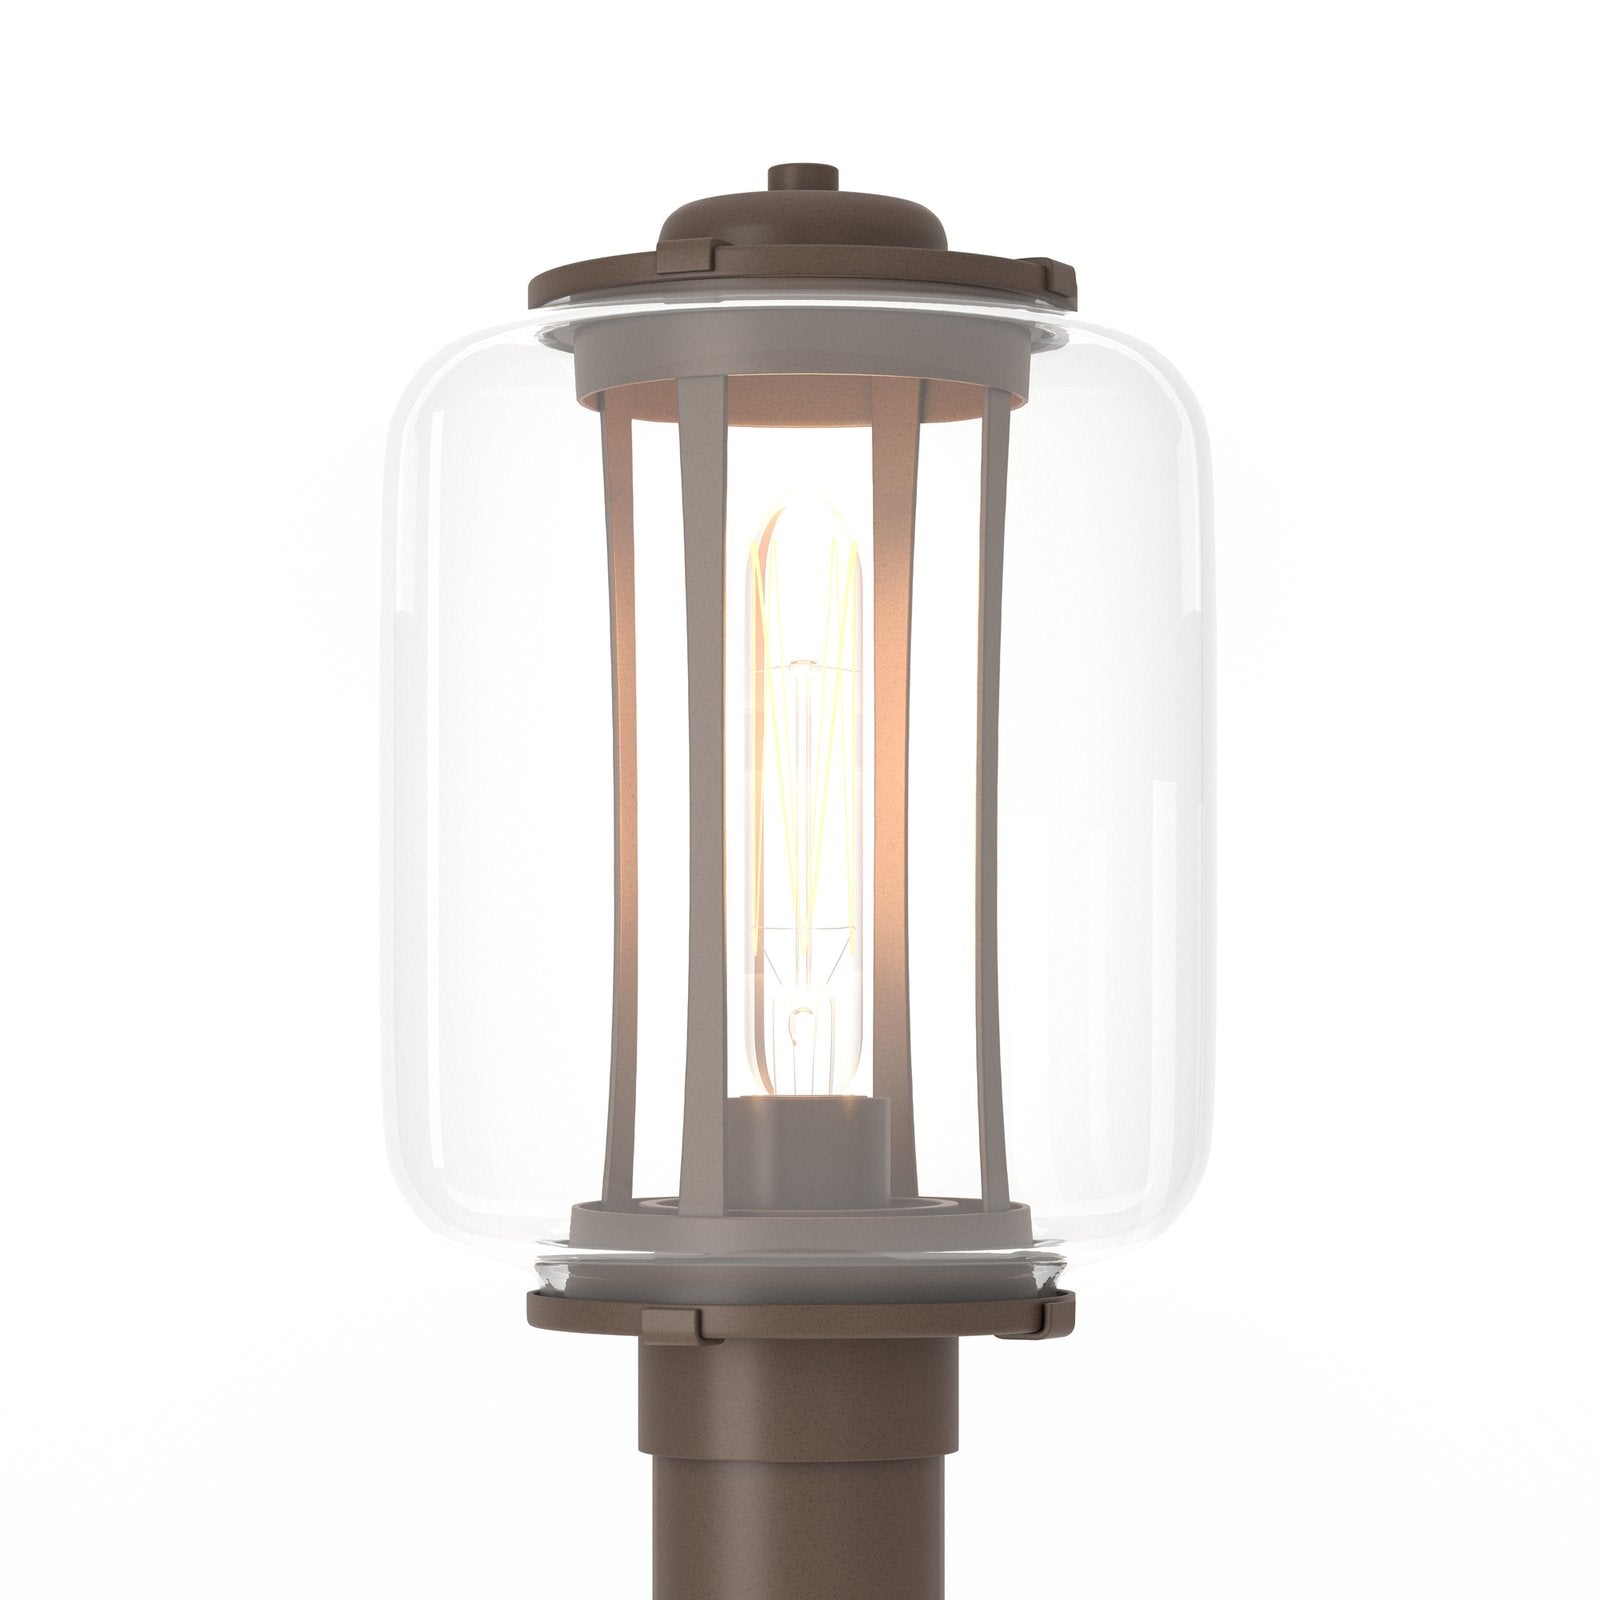 Hubbardton Forge Fairwinds Outdoor Post Light Outdoor l Post/Pier Mounts Hubbardton Forge Coastal Bronze Clear Glass (ZM) 